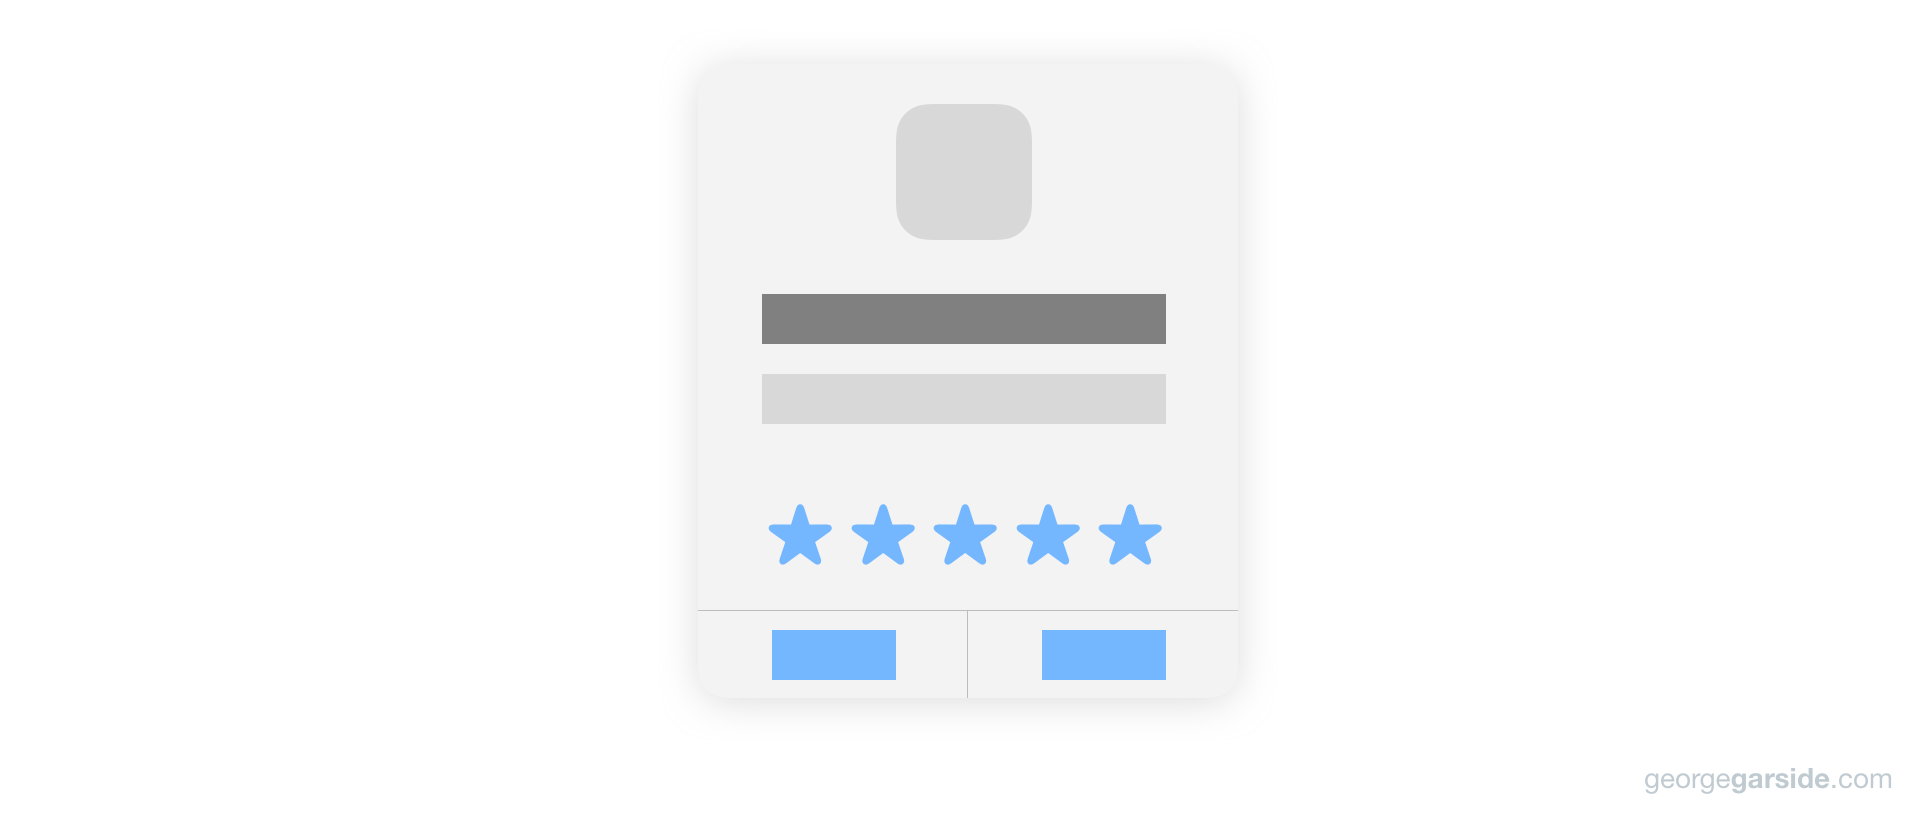 SKStoreReviewController's request review method called from SwiftUI